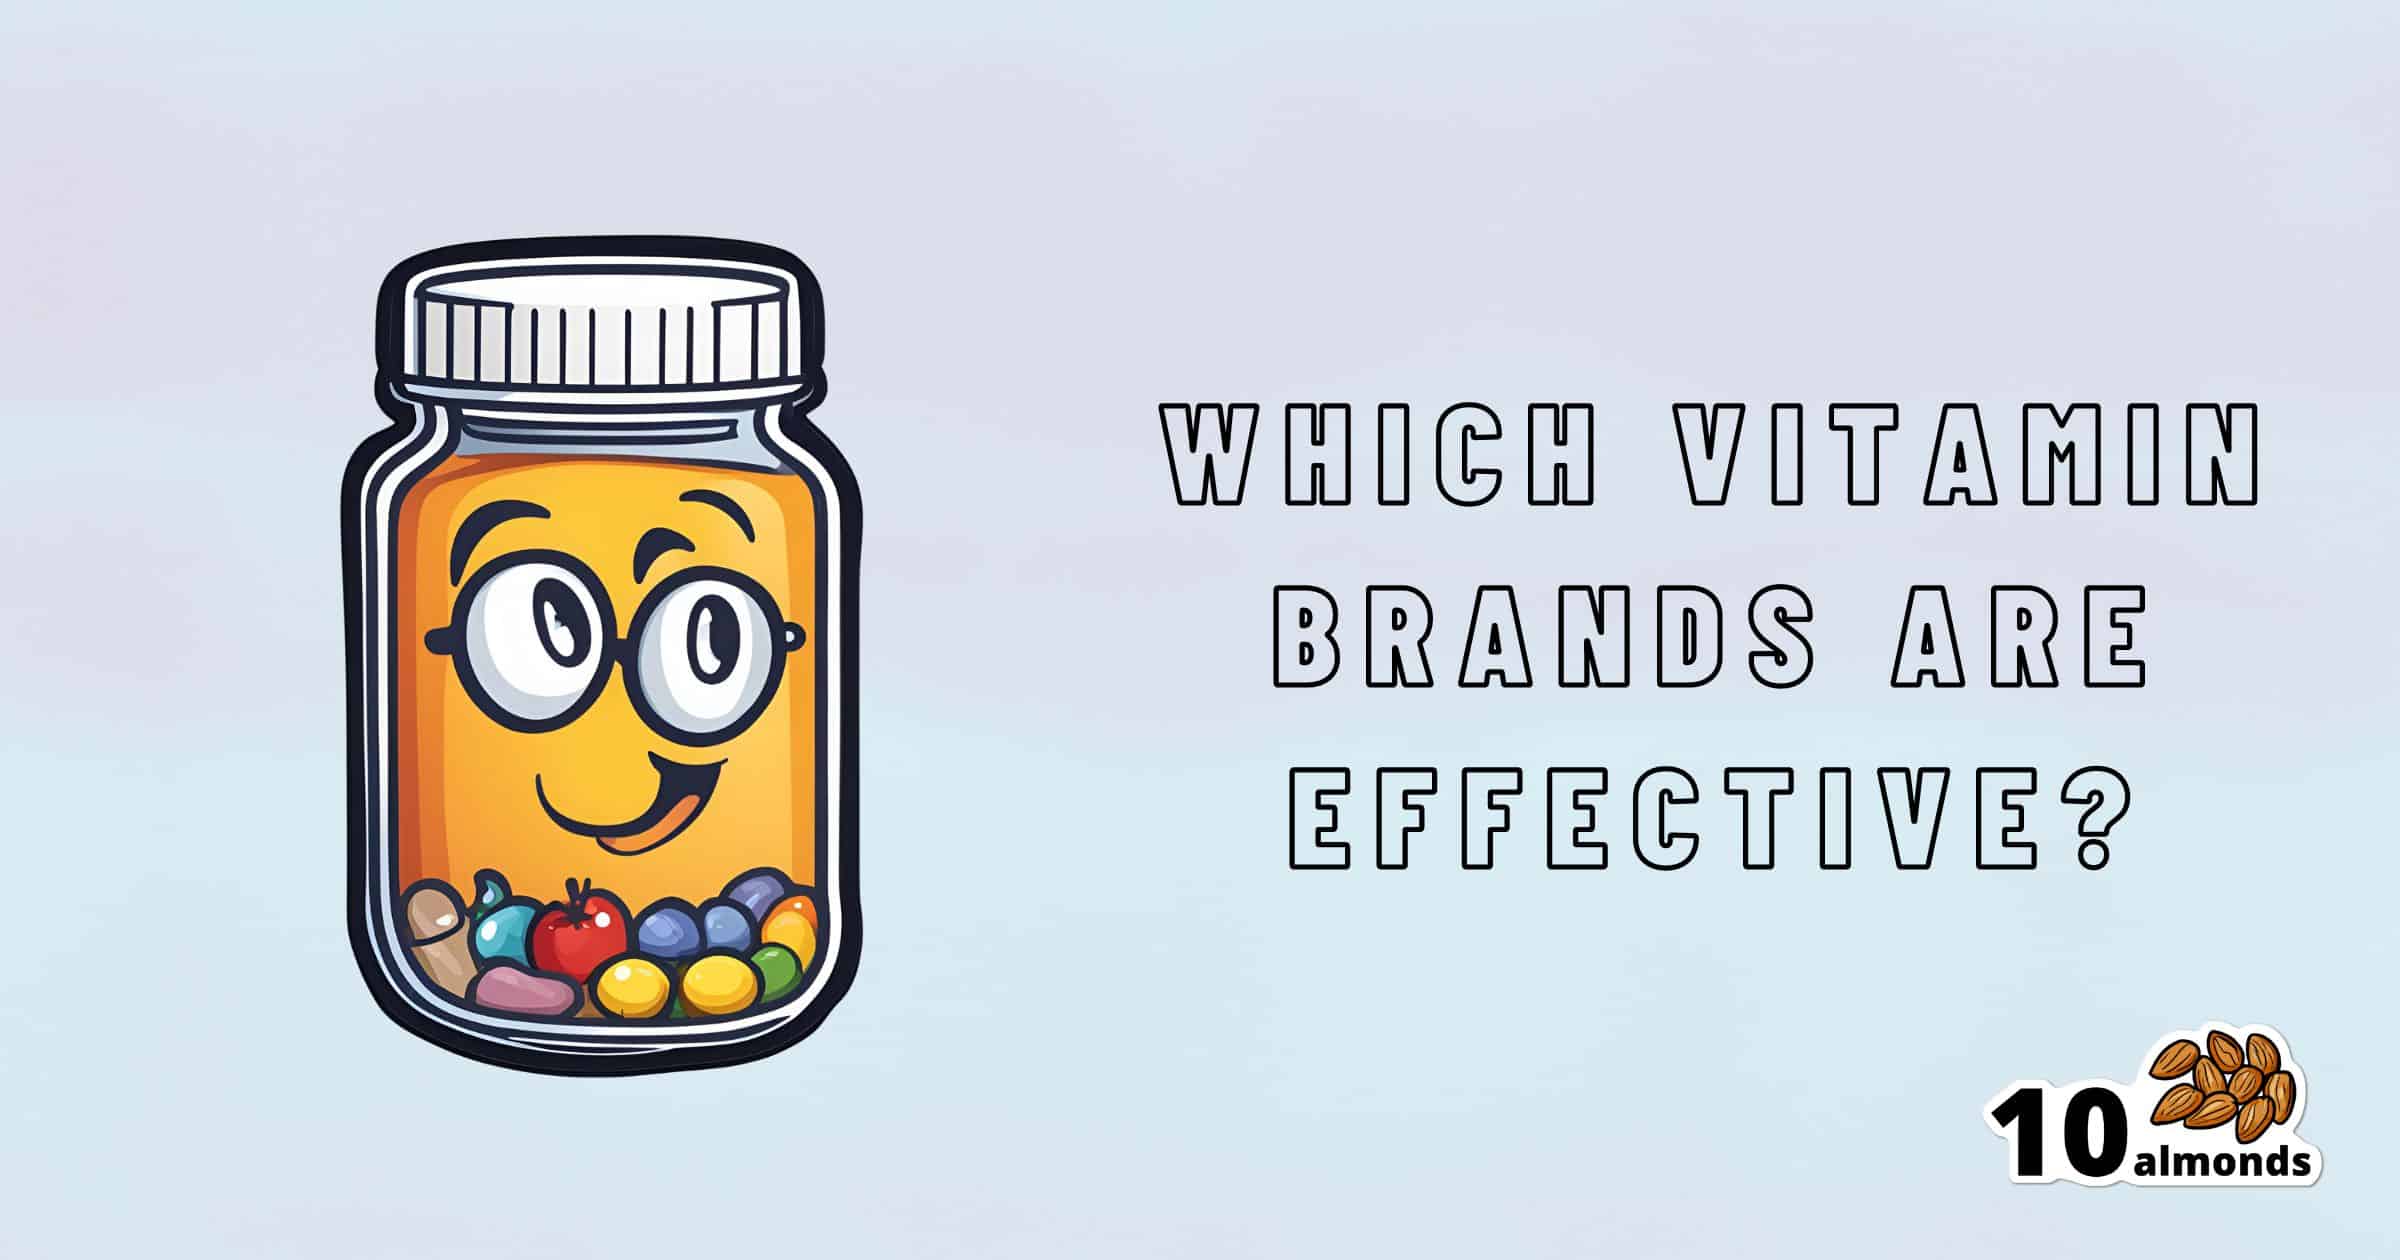 A cartoon image of a vitamin bottle with a smiling face and glasses filled with colorful pills on the left. Text on the right reads, "Which Vitamin Brands Are Effective?" with an icon of 10 almonds at the bottom right, highlighting questions about vitamin effectiveness.